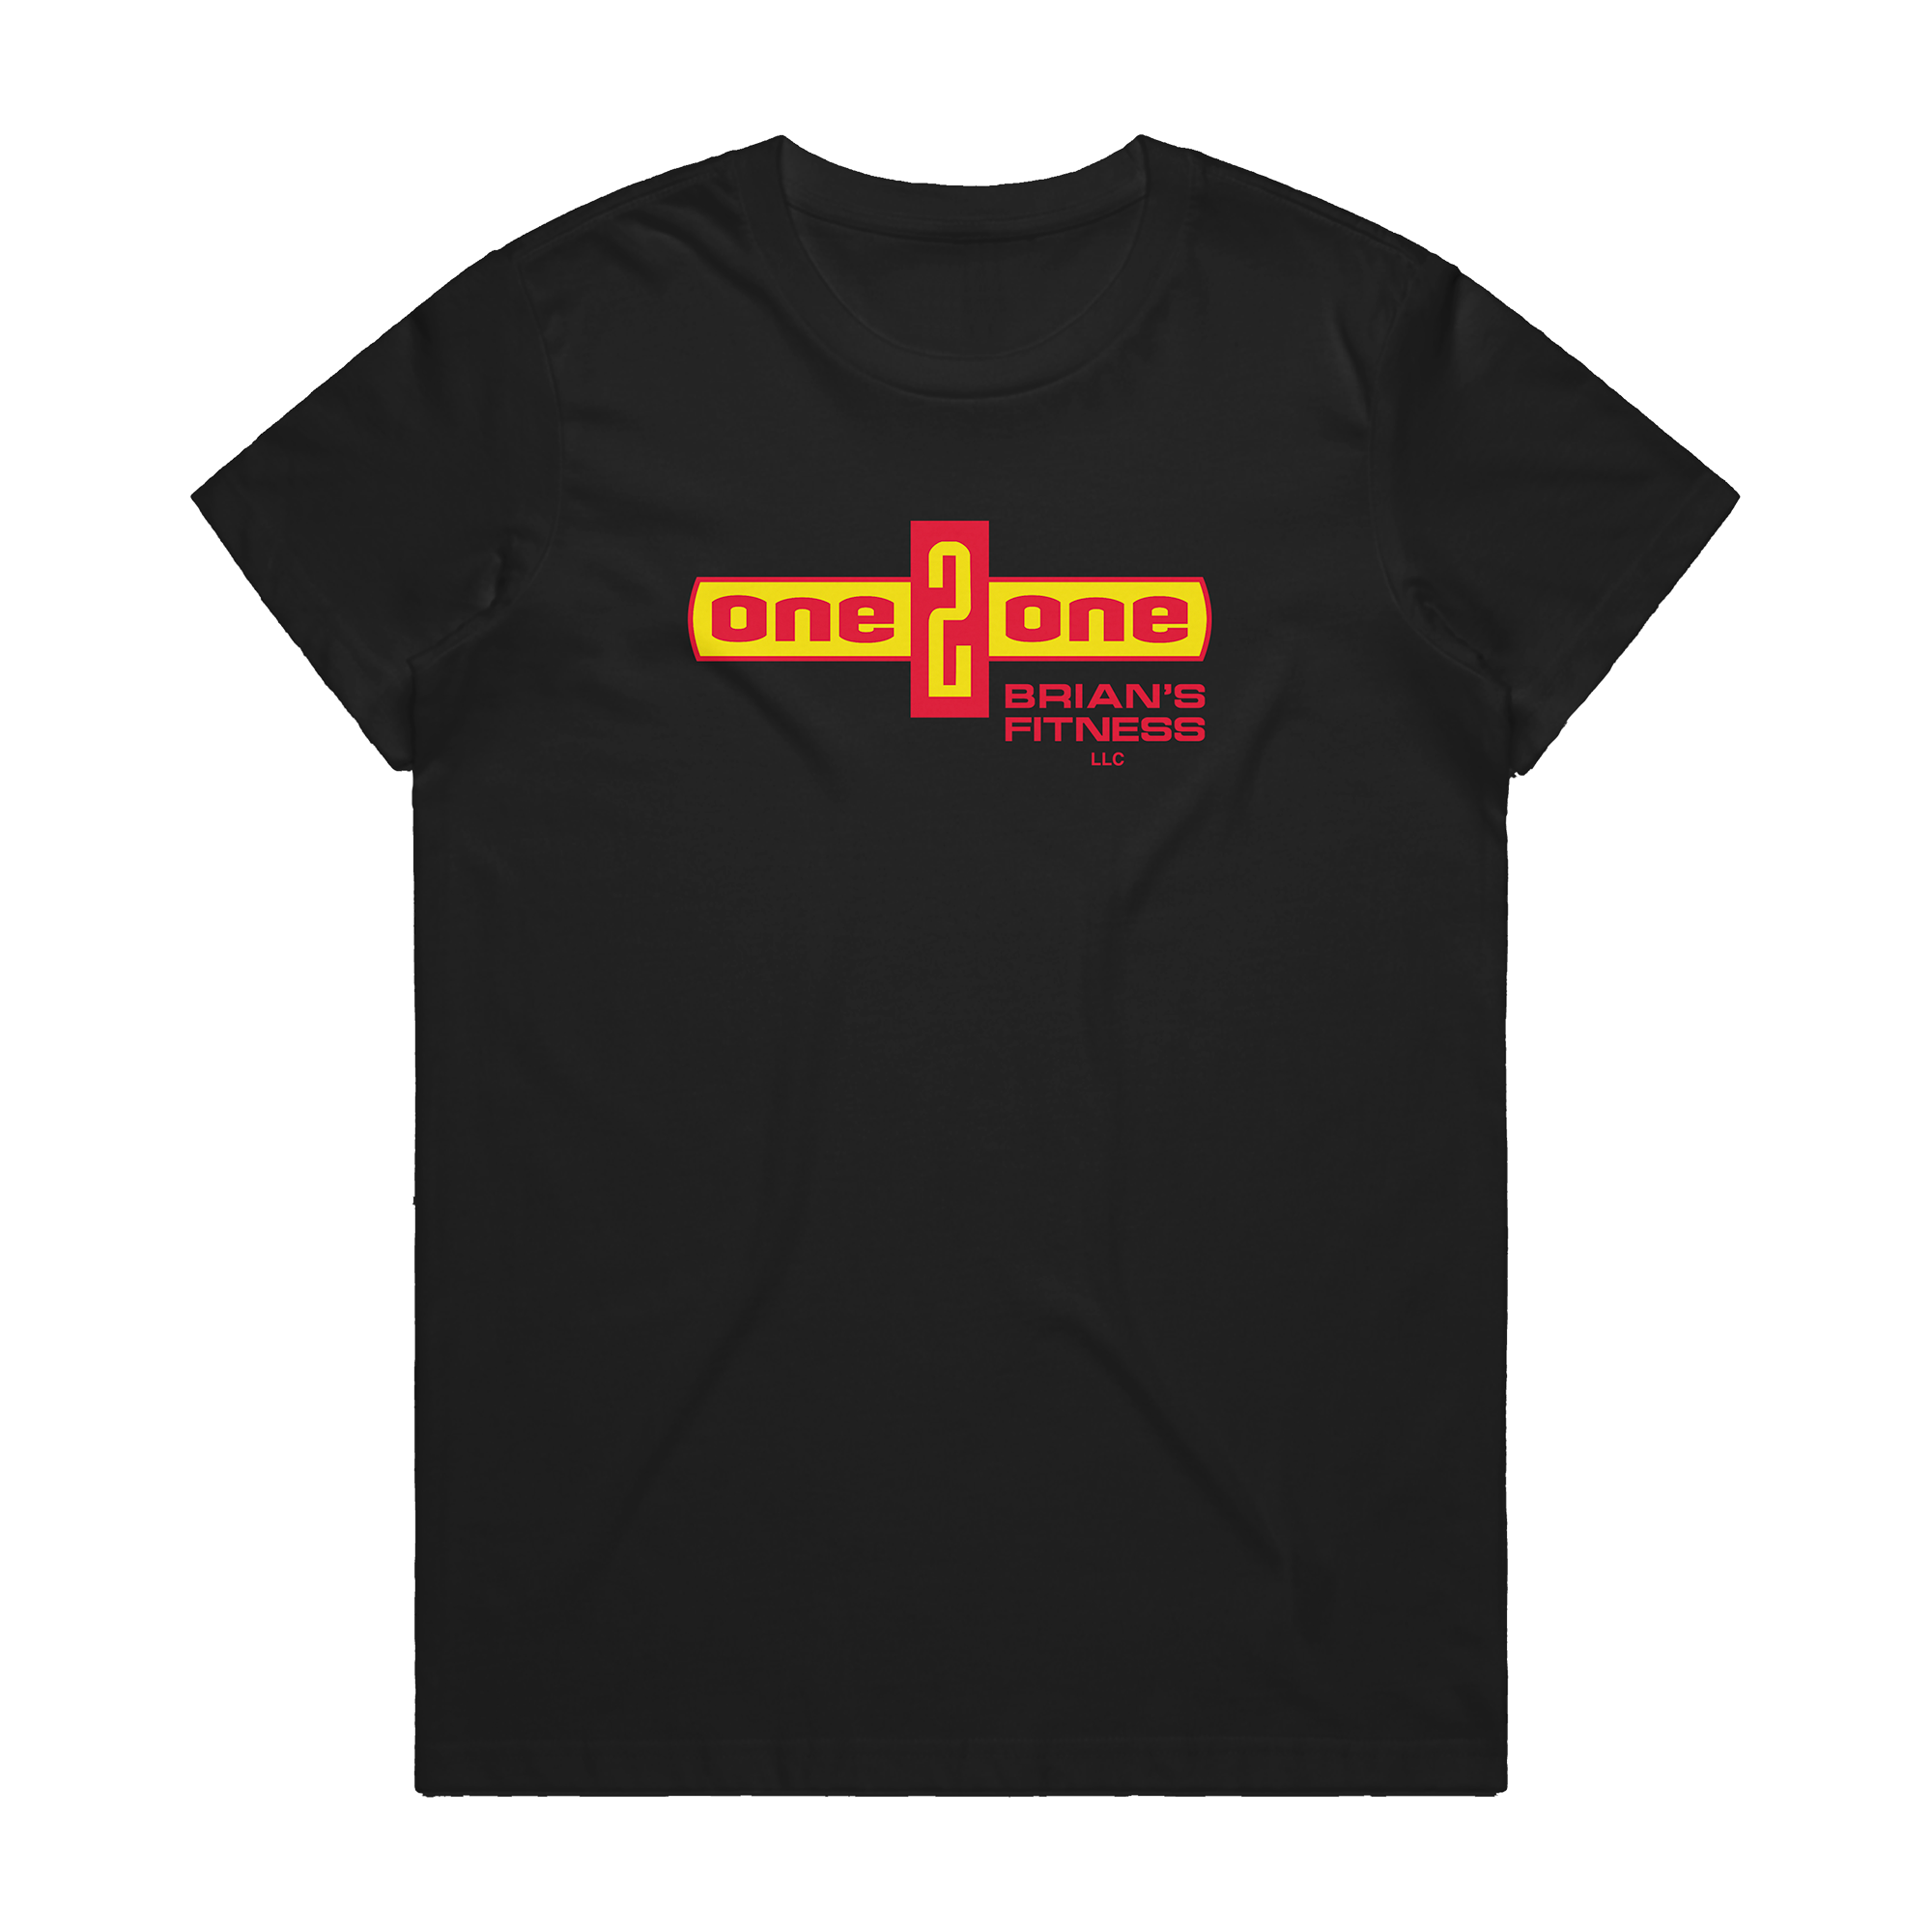 One 2 One Fitness - Uncommon Breed Women's Tee